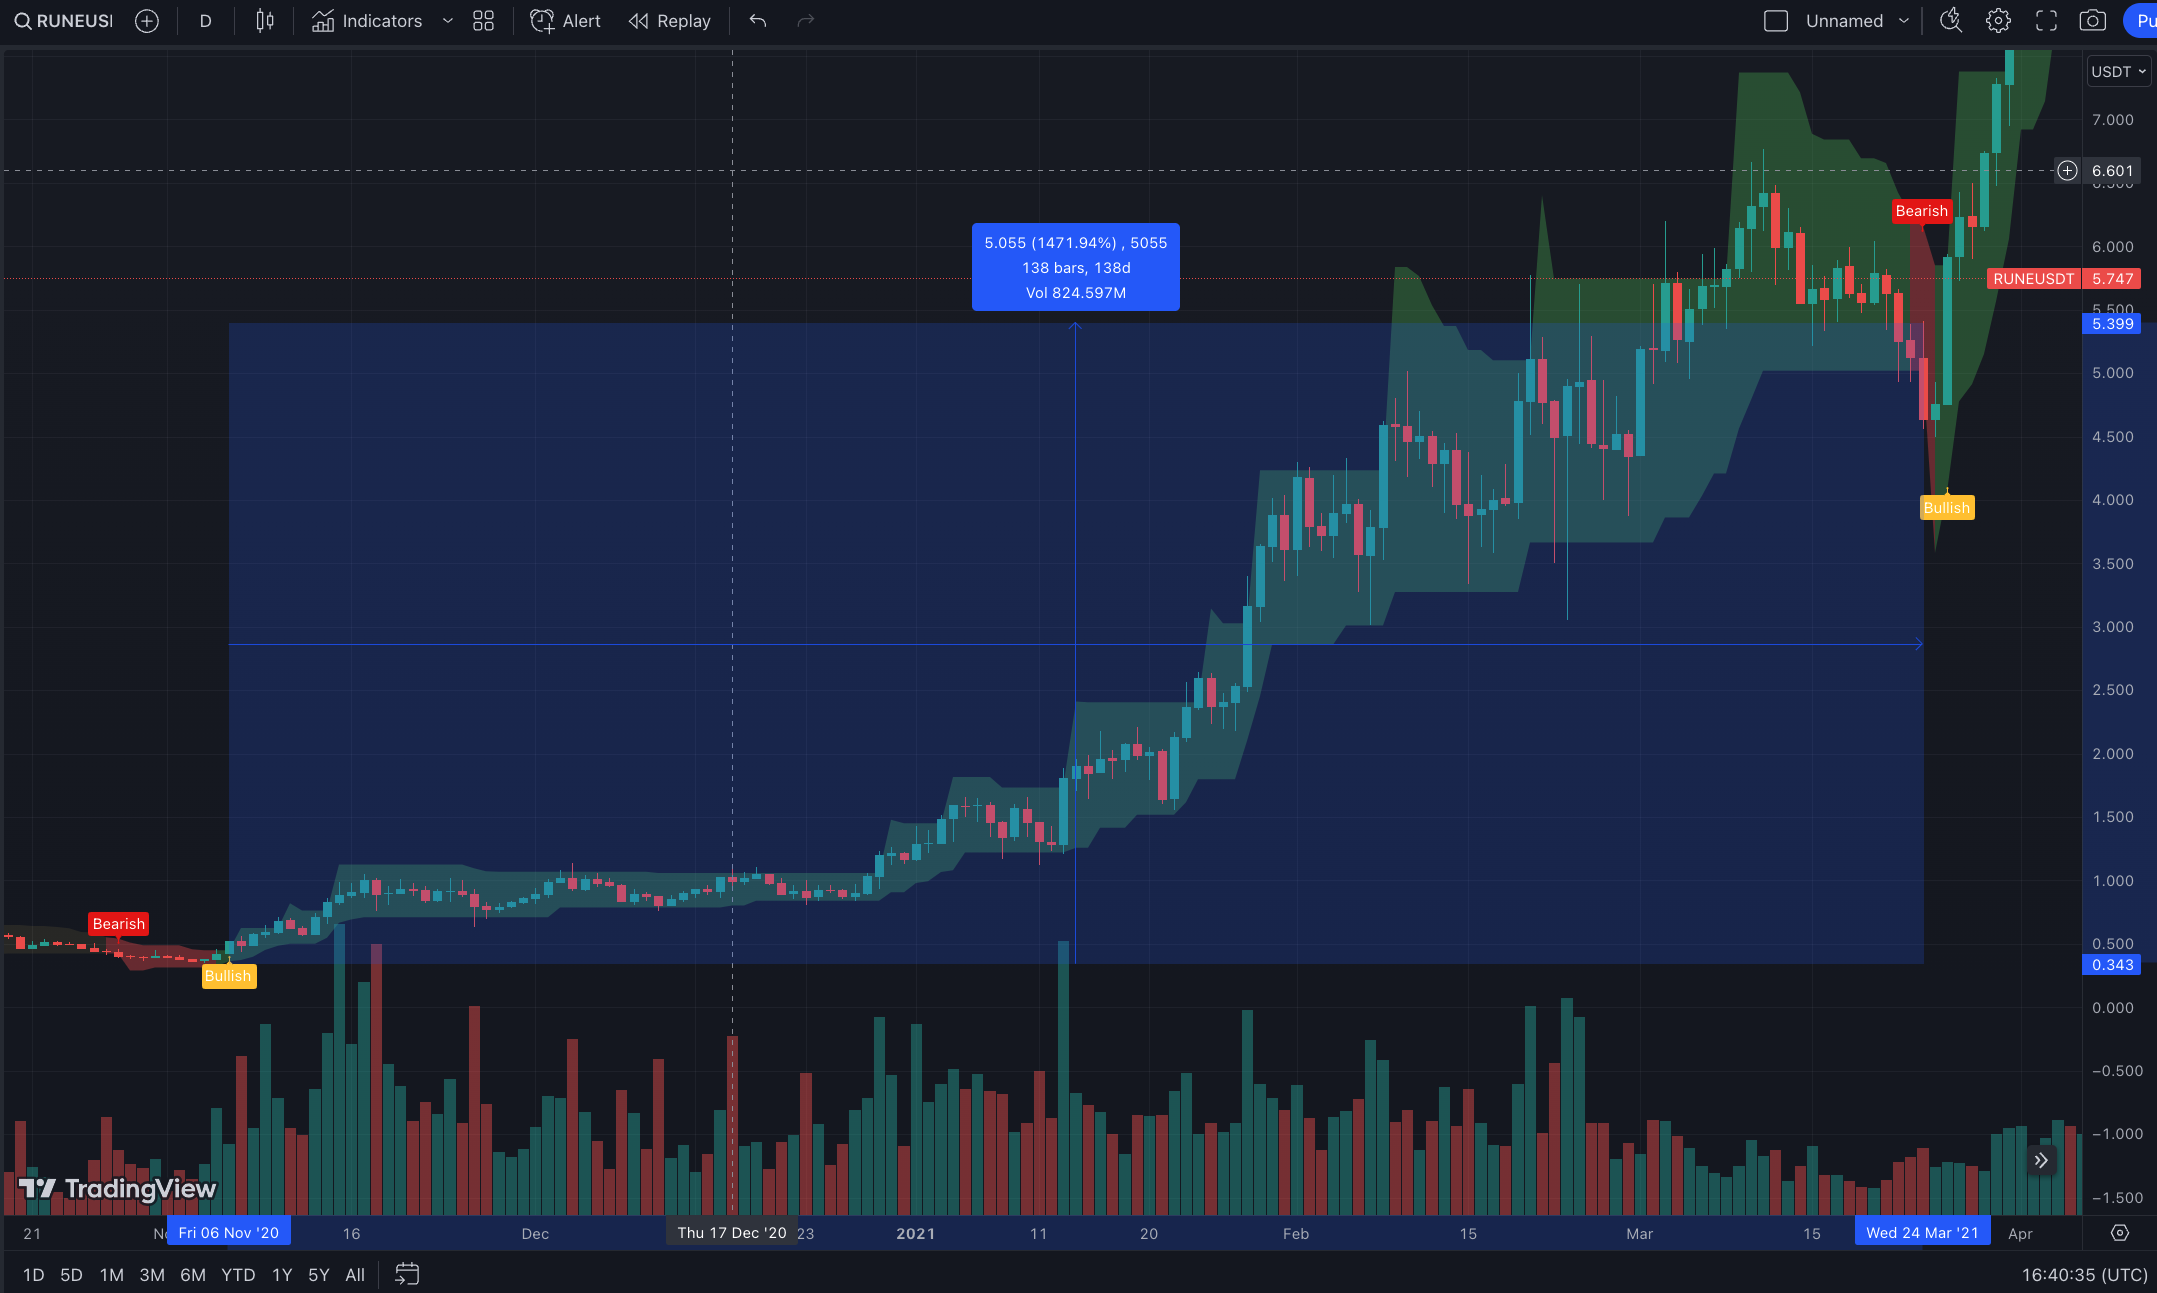 Crypto charting tool example - Showing how to apply the Money Line tool for RUNE